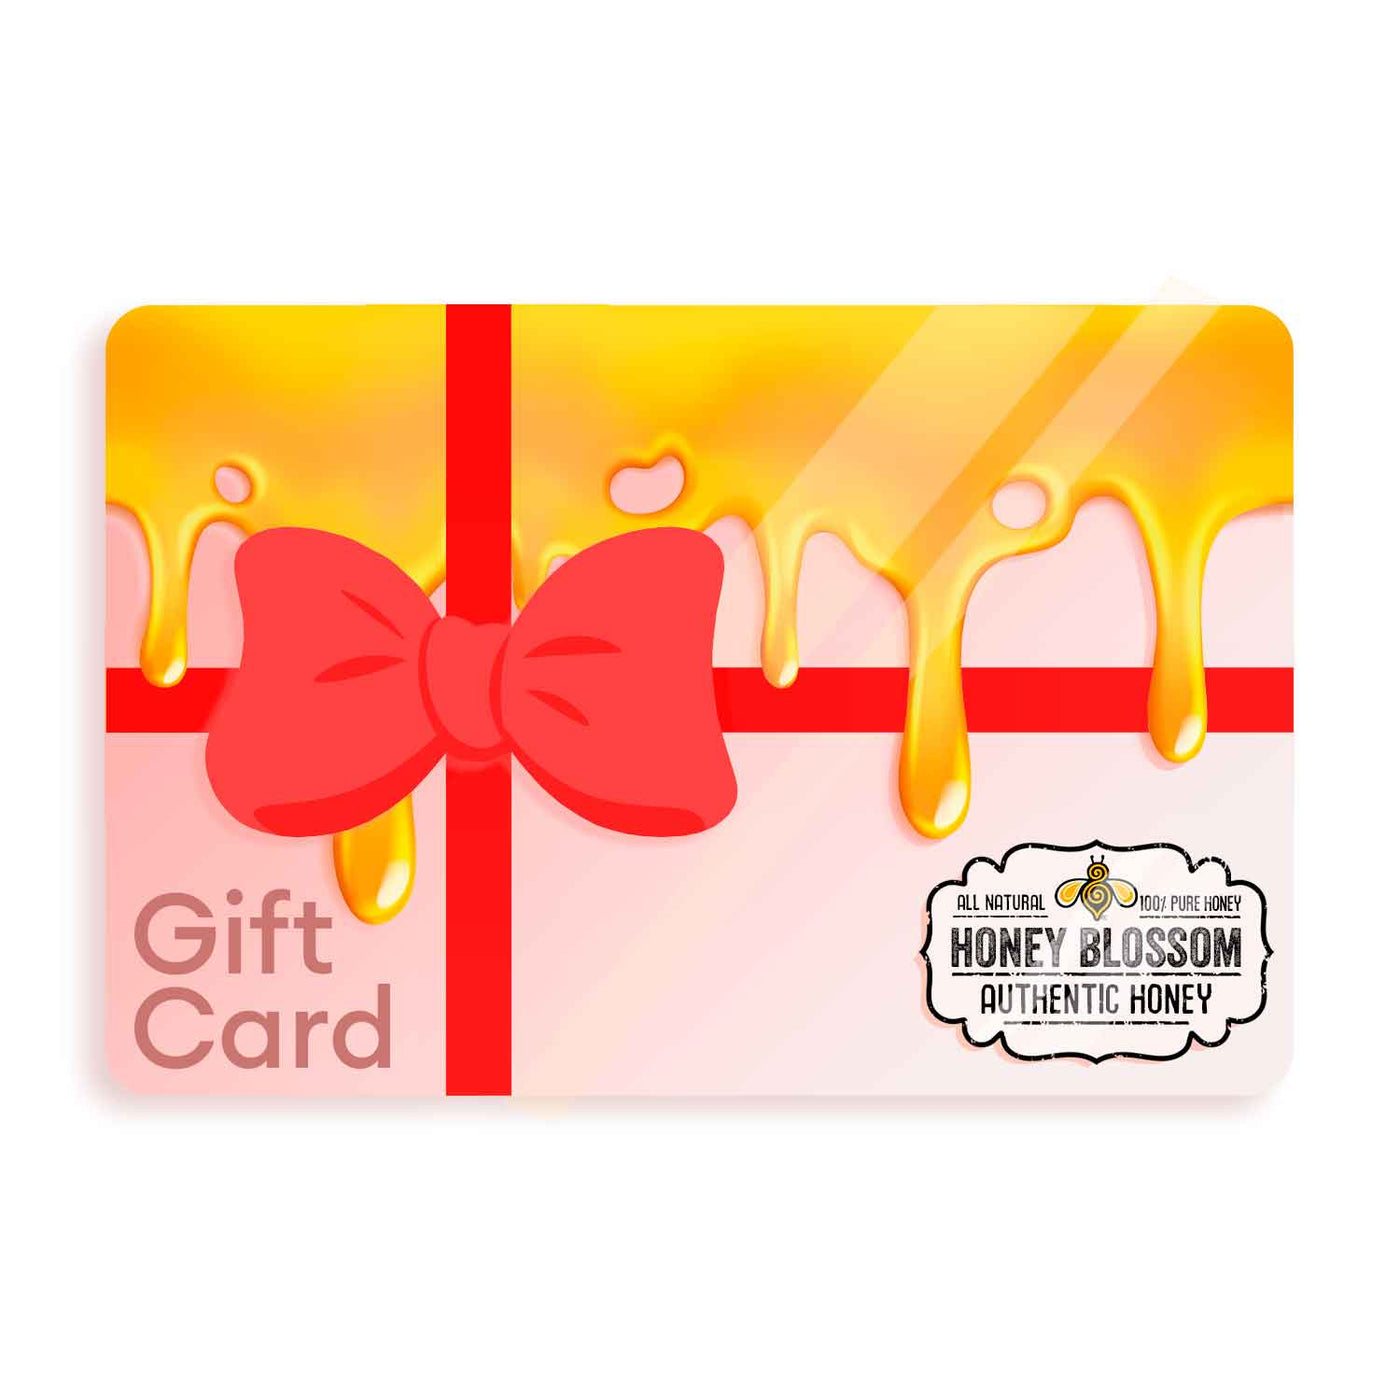 a card printed as a gift with honey spilling, printed text that reads: "Gift Card" and the Honey Blossom logo